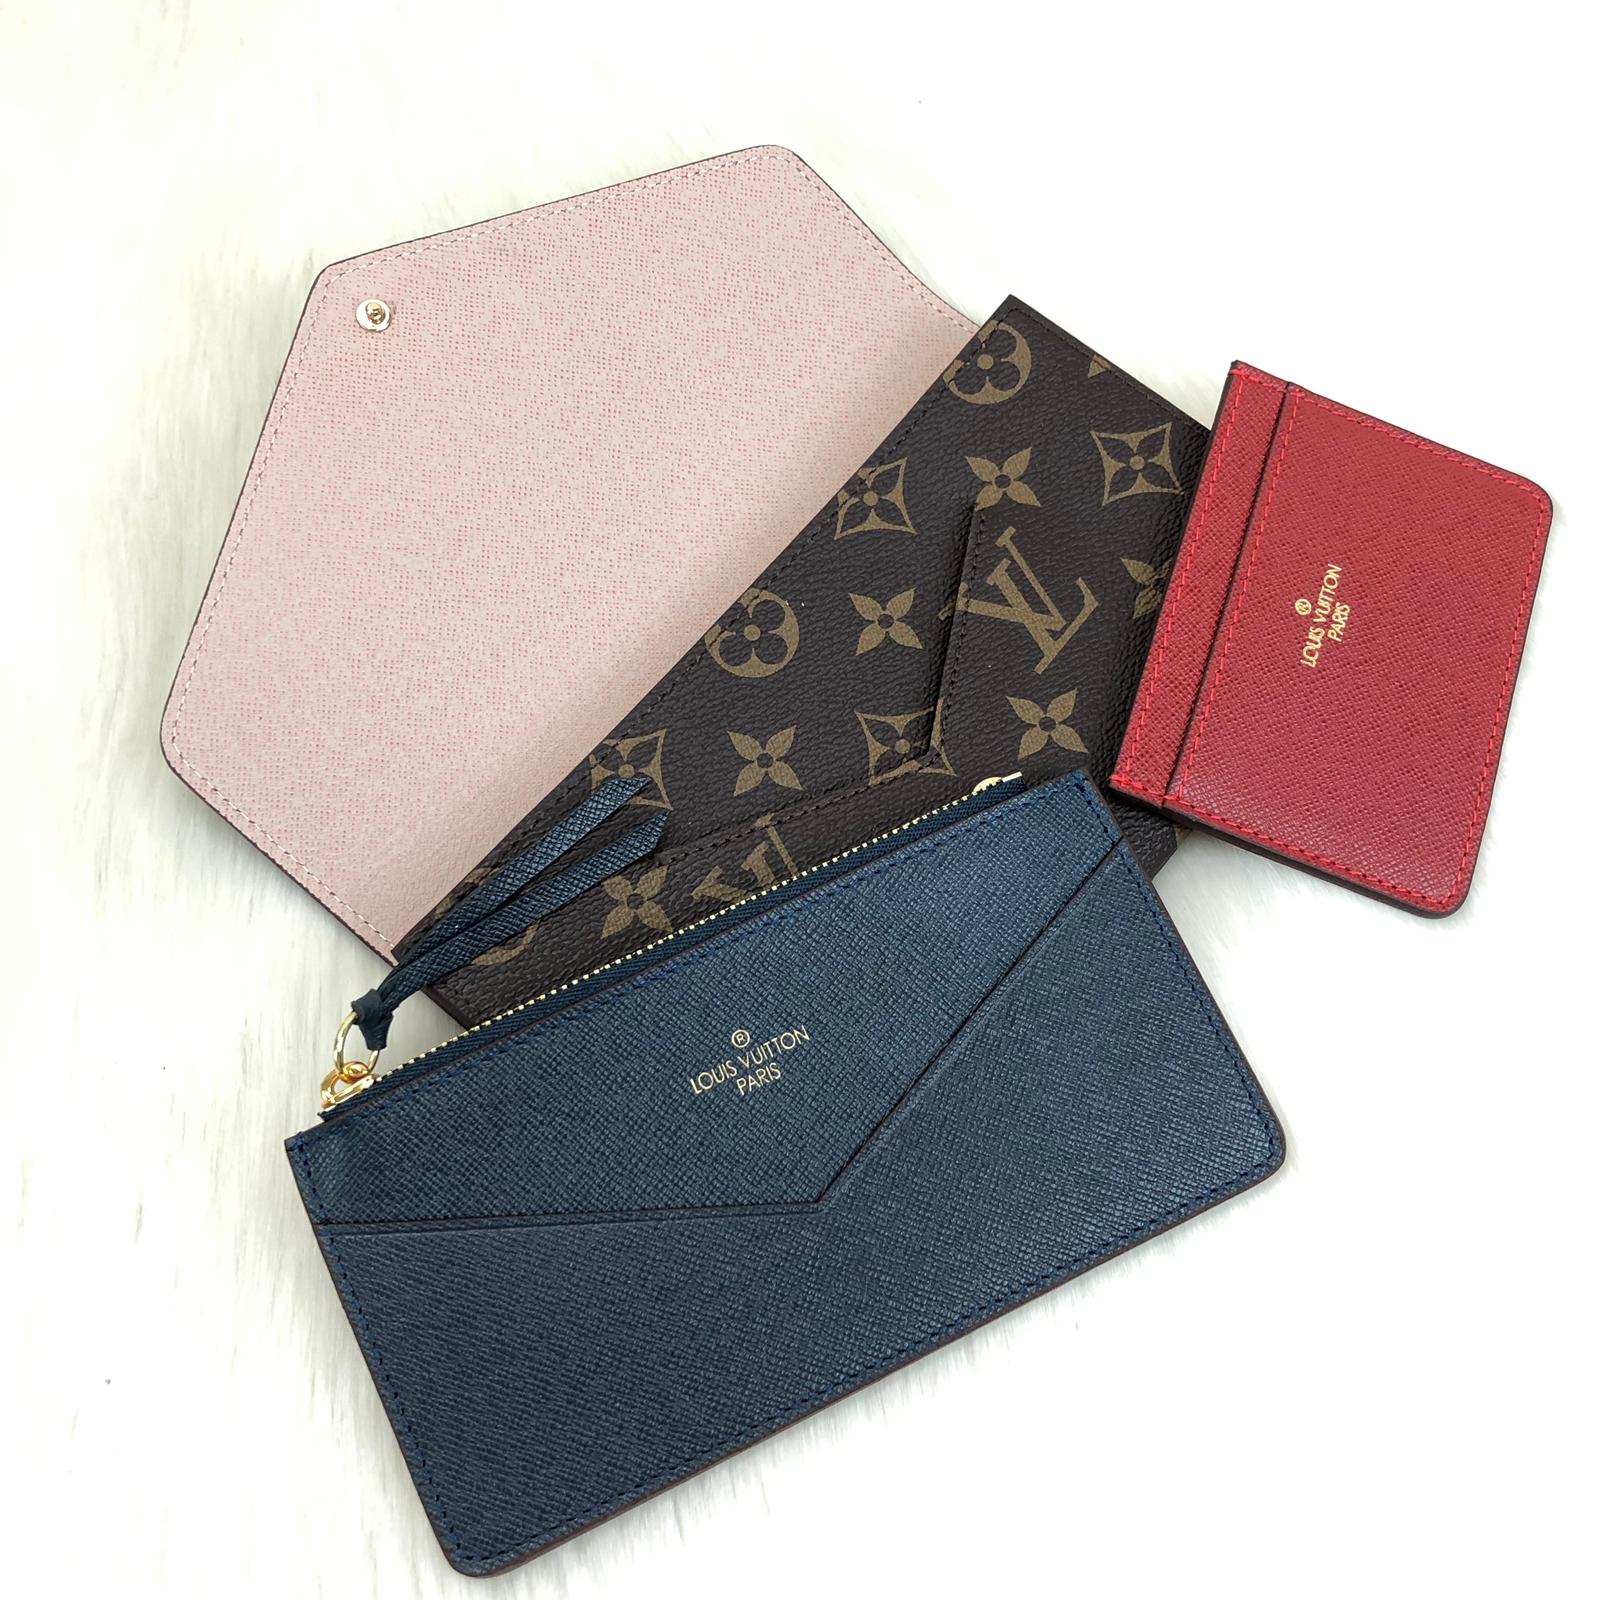 Galtay Boutique - Authentic Brand New Louis Vuitton Jeanne Wallet - M62155  - comes with dust bag&box - DM us for price - Ship Worldwide